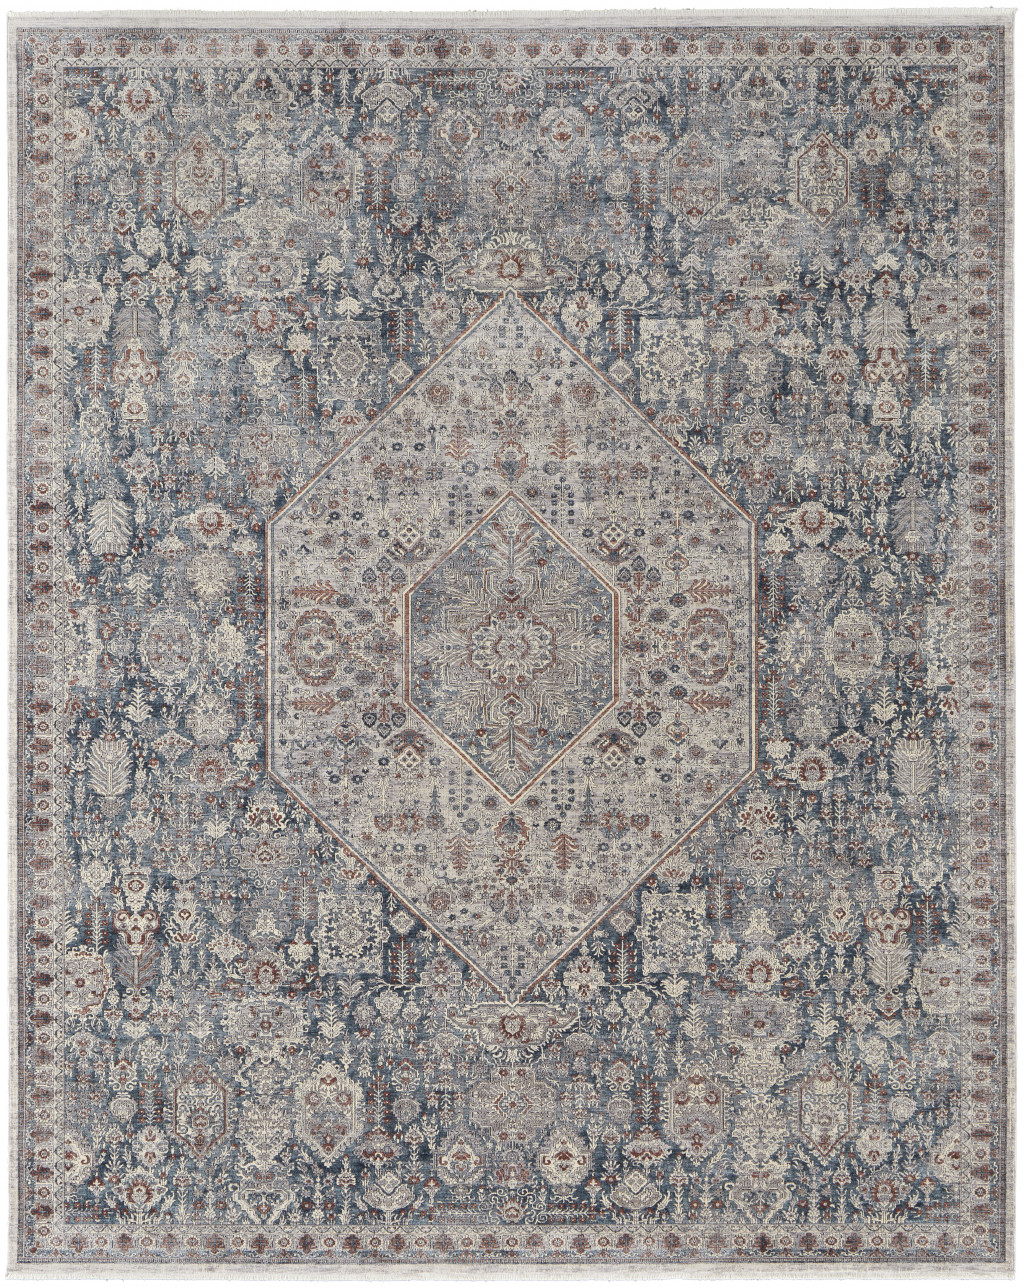 7' X 10' Blue And Ivory Floral Power Loom Stain Resistant Area Rug-514475-1